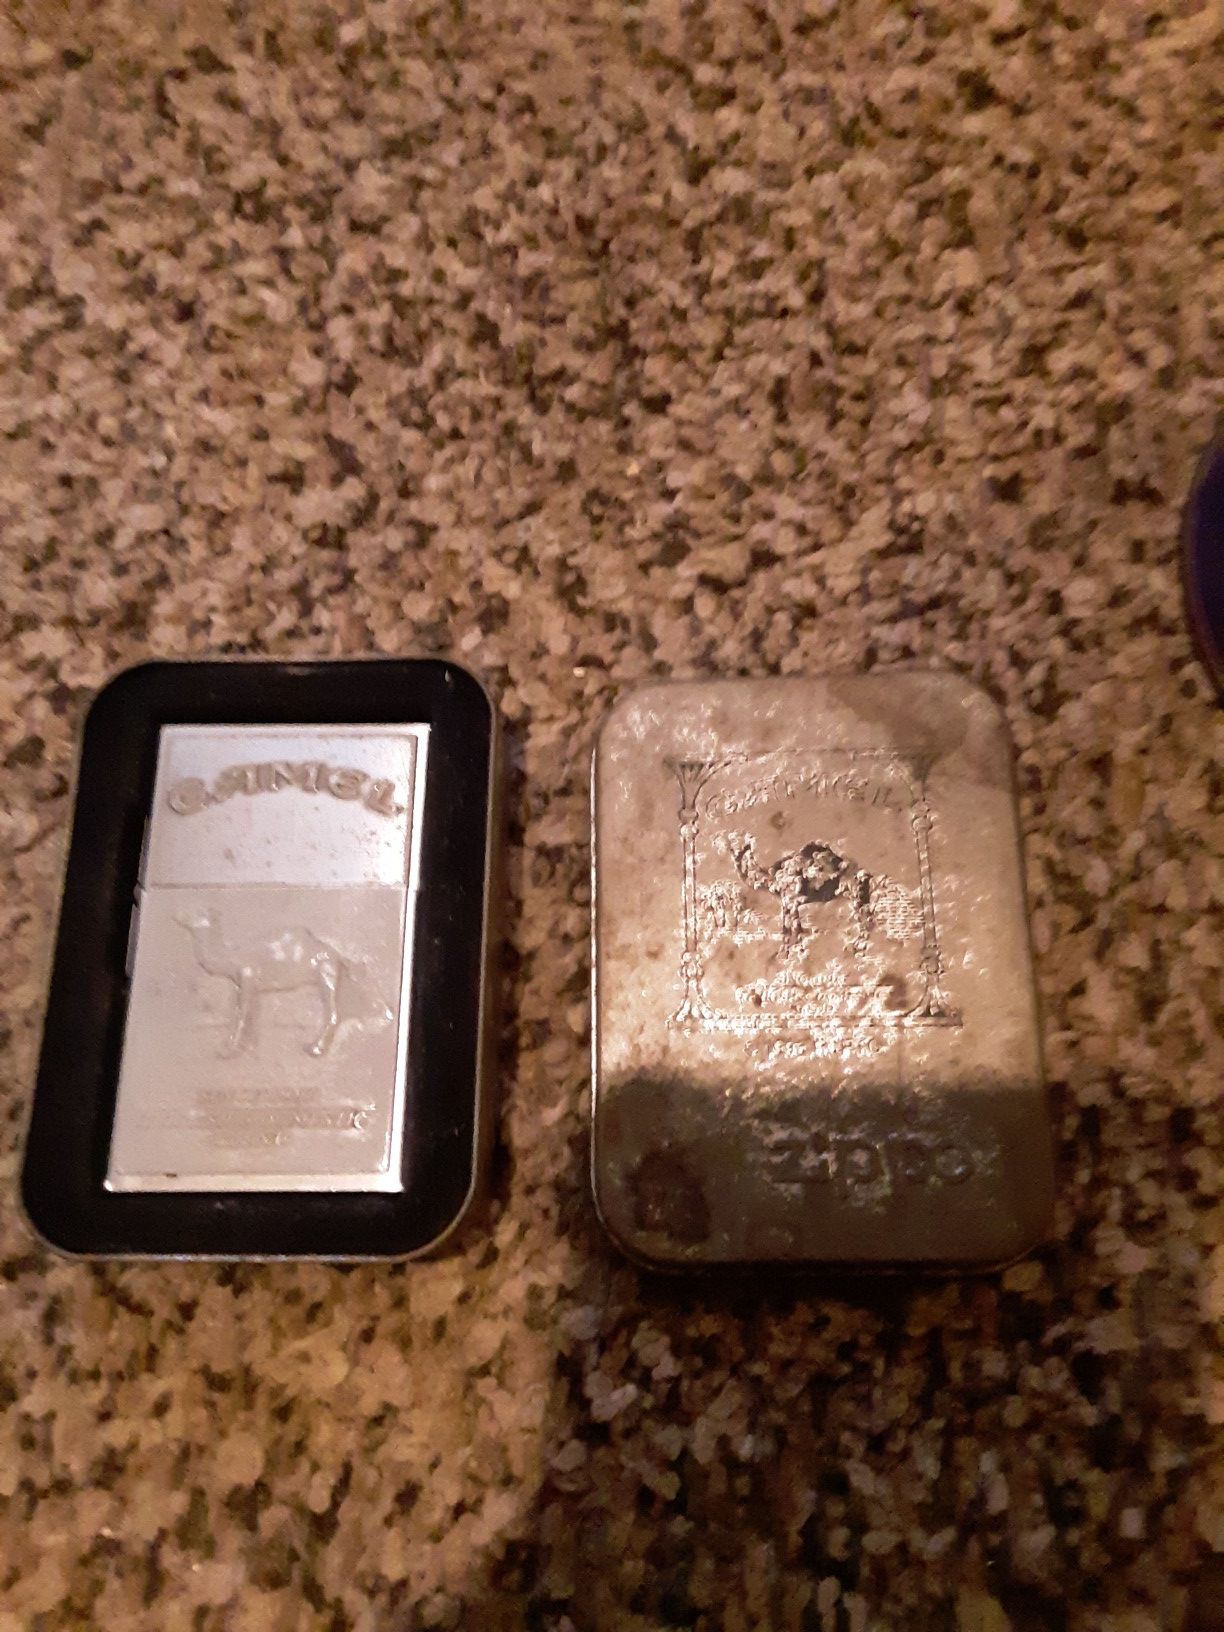 I have about 100 zippos I'm trying to sell. I have a few collectors pieces also. I have posted pictures of the collectibles